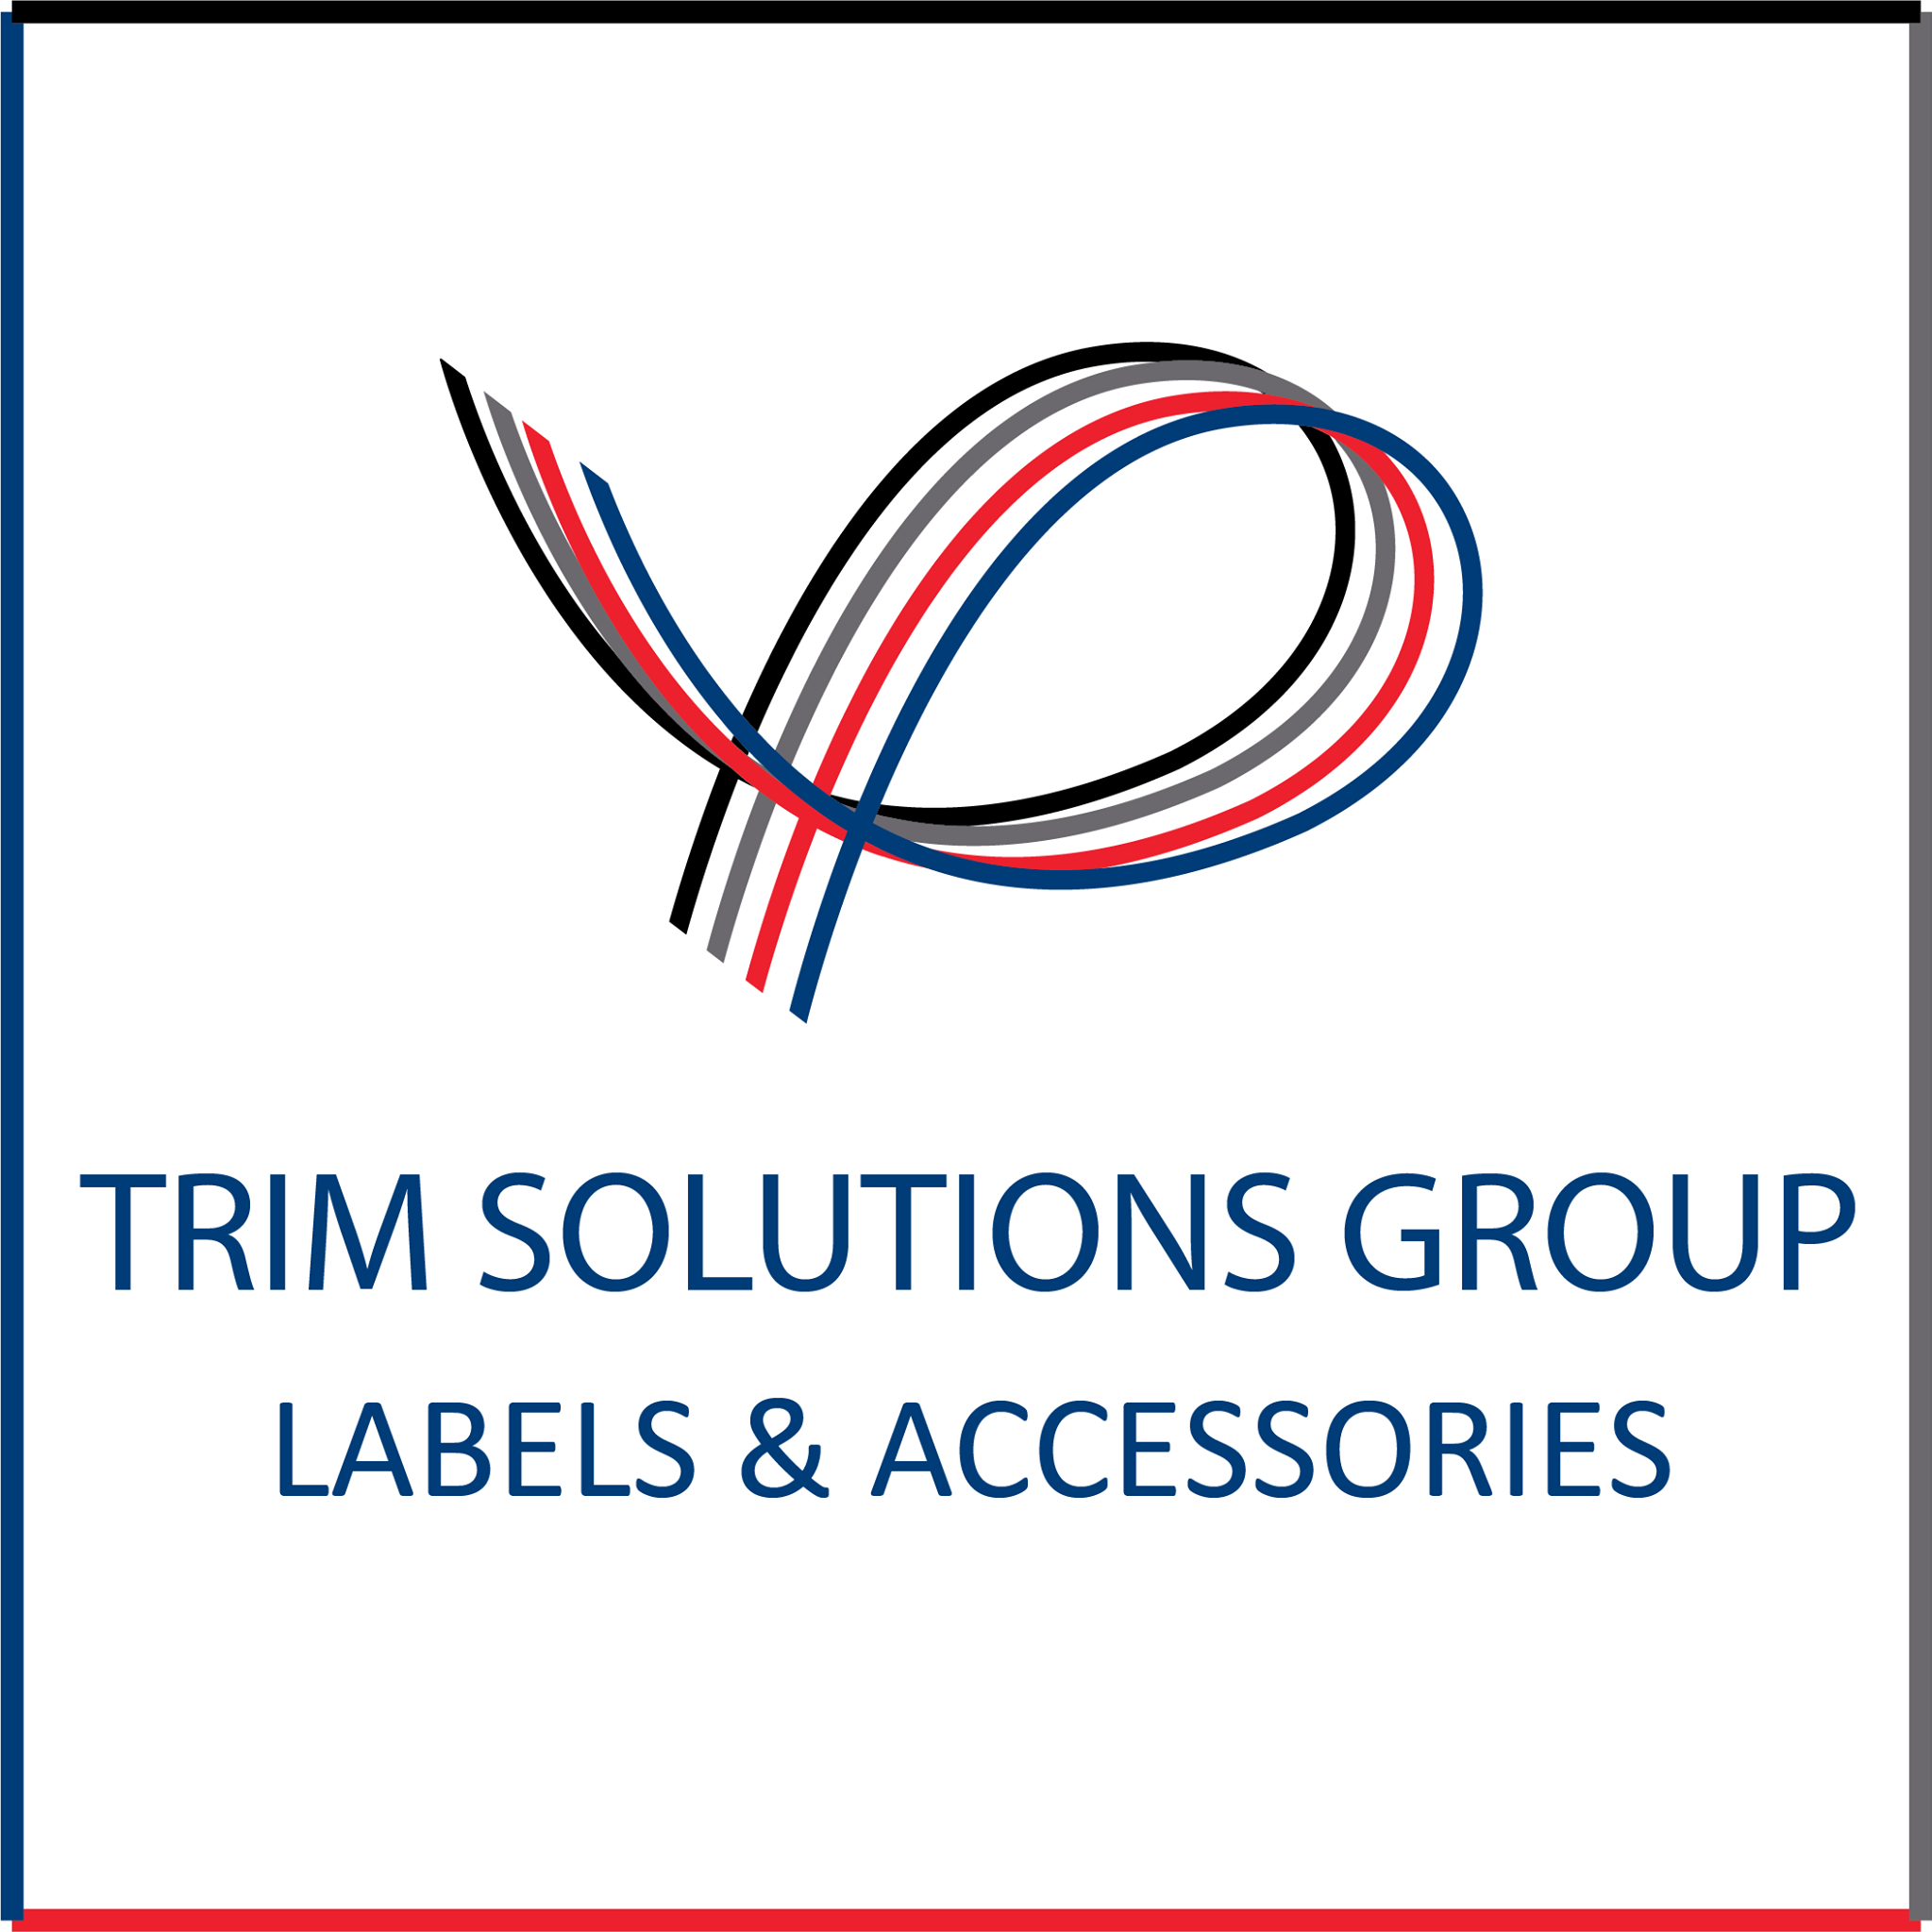 TRIM SOLUTIONS GROUP